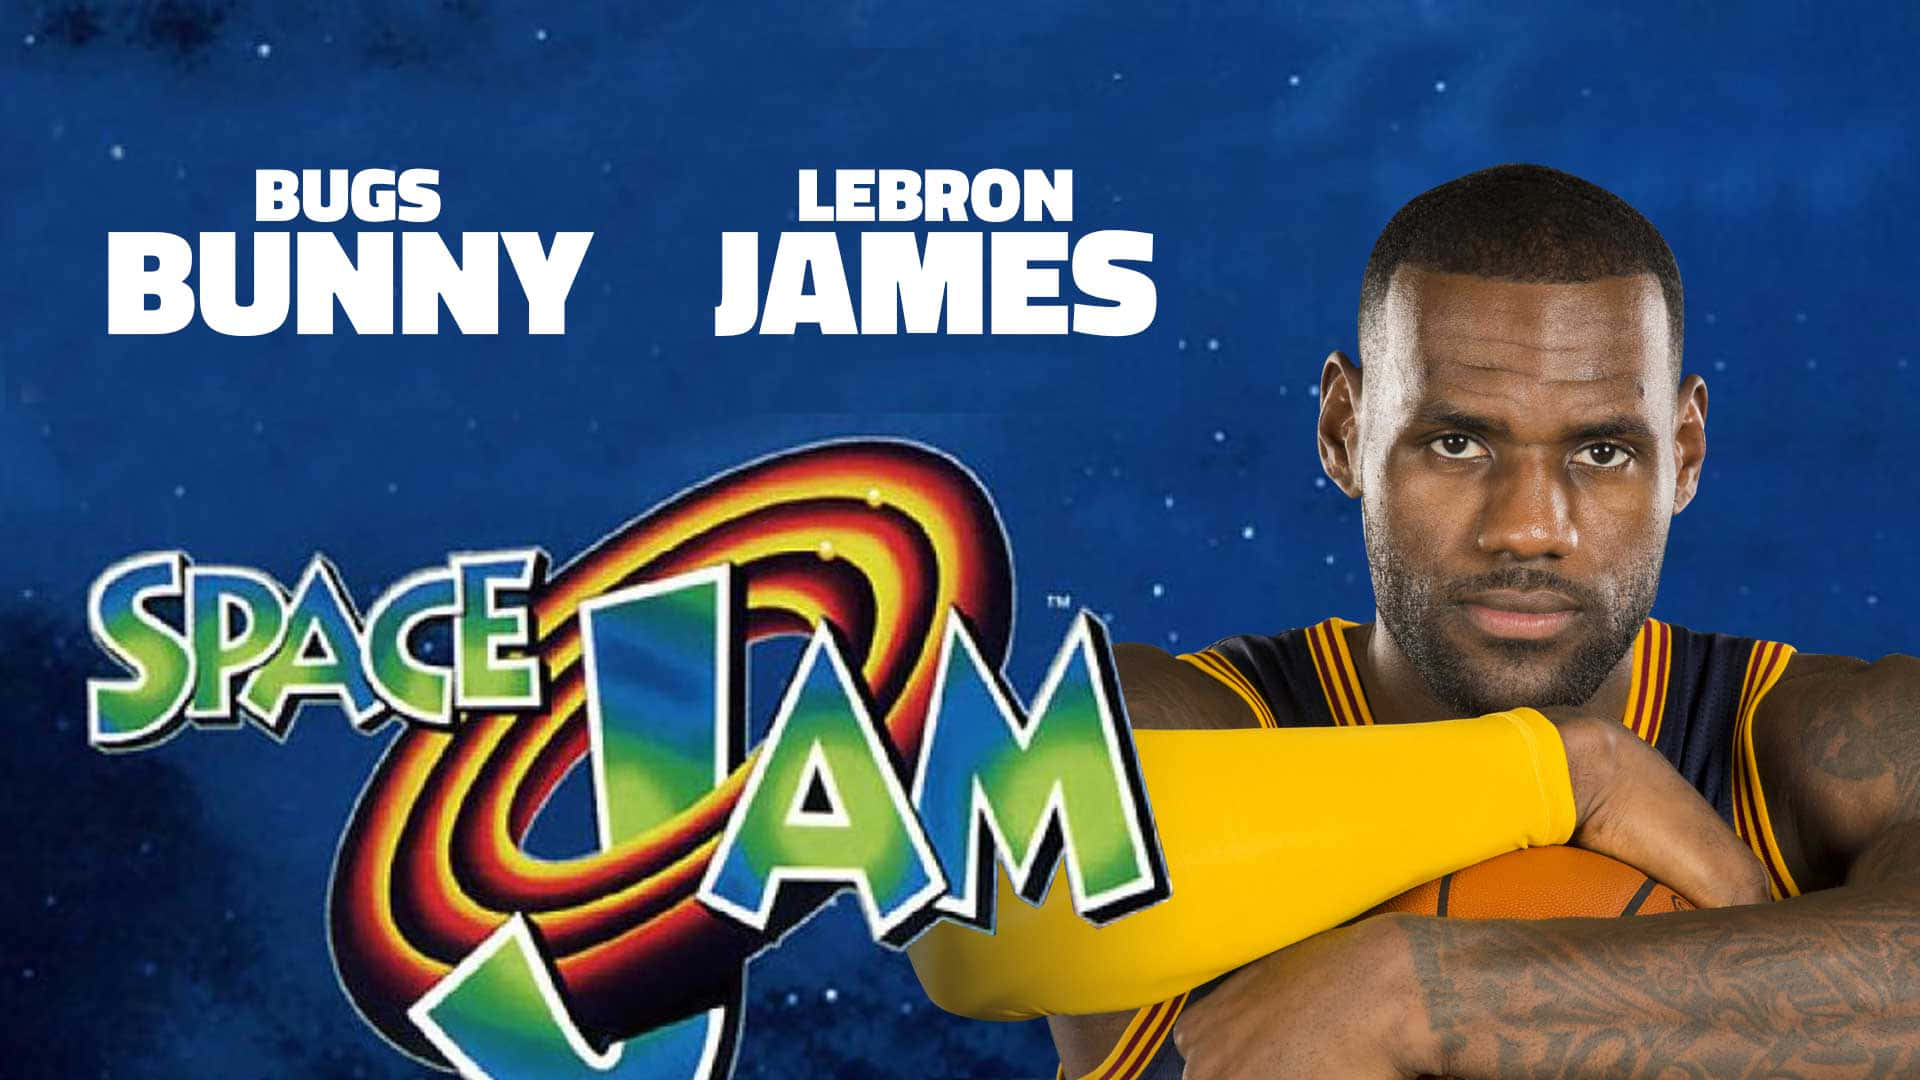 Get ready to blast off into a world of intergalactic basketball with Space Jam: A New Legacy! Wallpaper